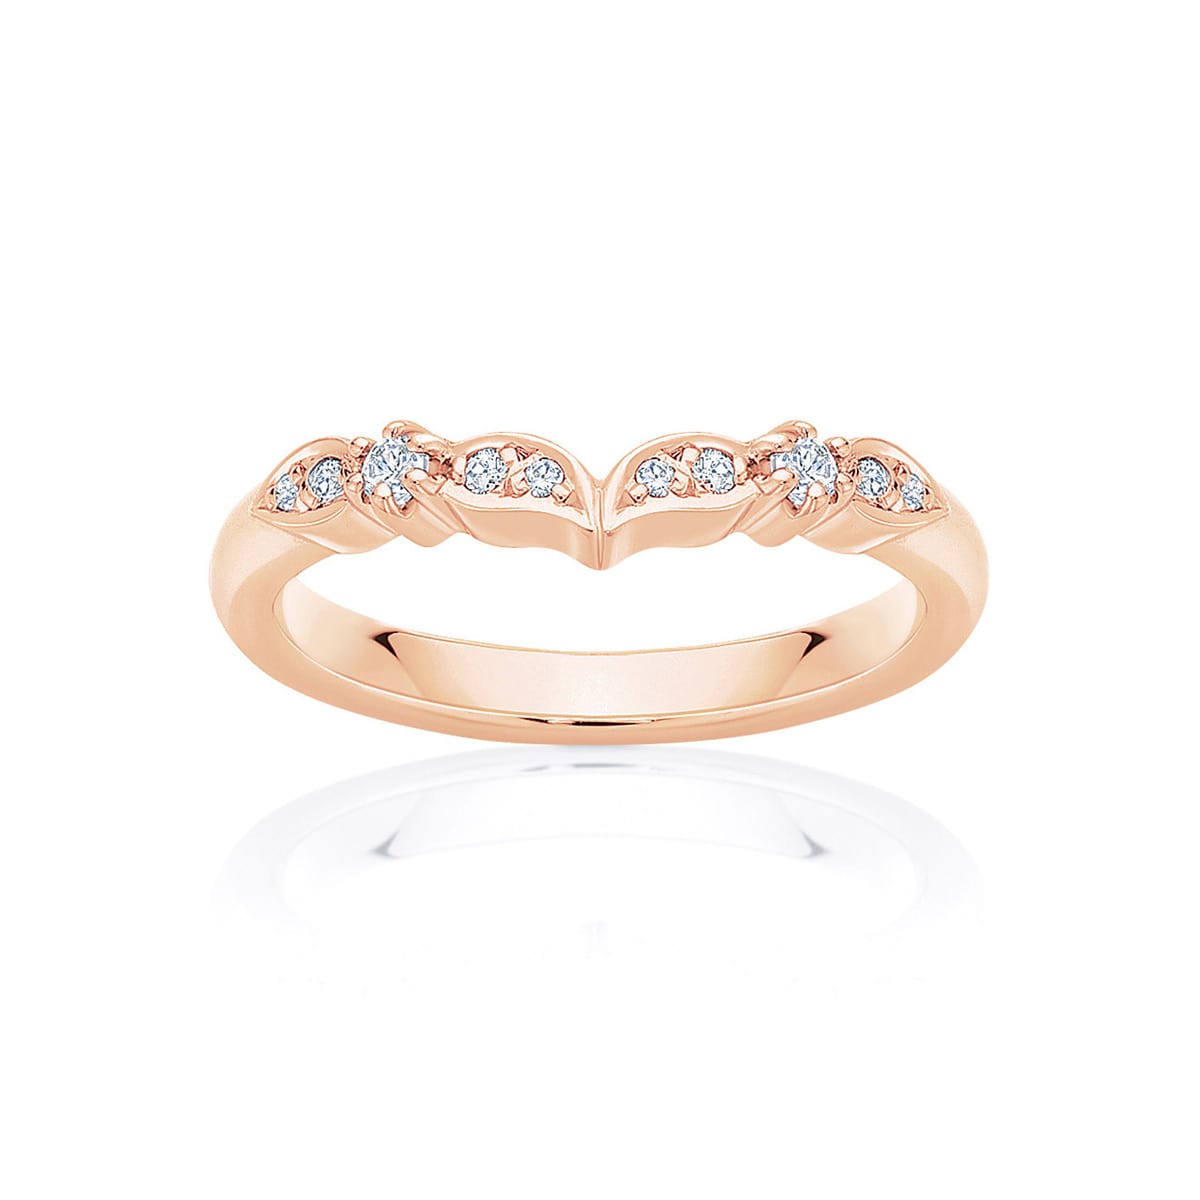 Womens Contoured Vintage Diamond Wedding Ring in Rose Gold | Paisley